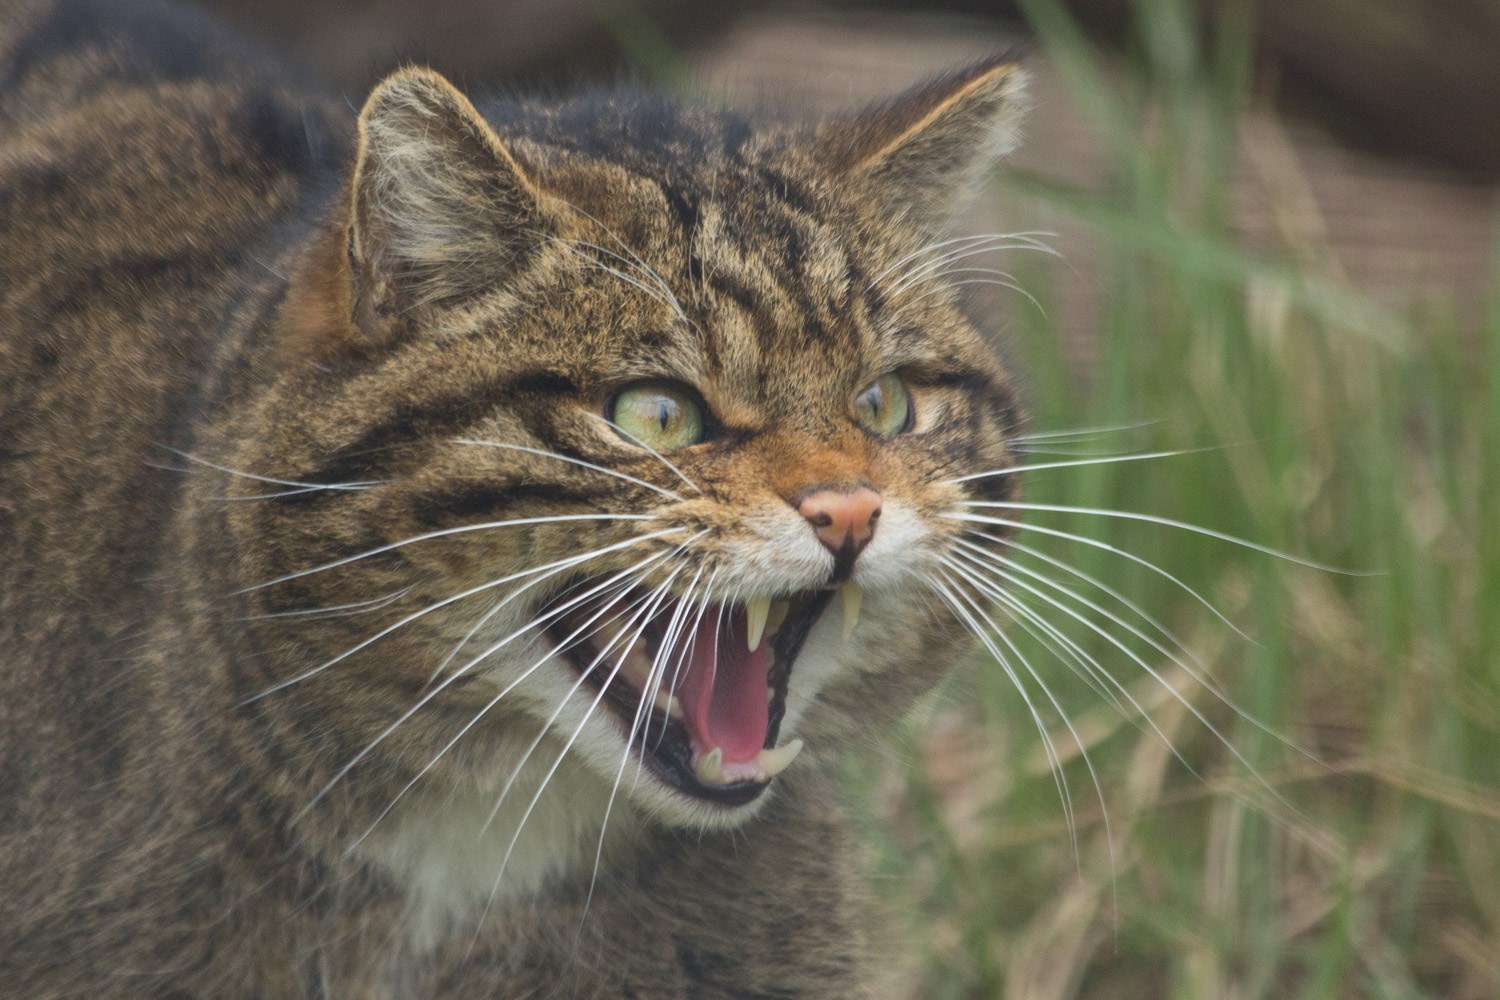 Front half of a Scottish wildcat snarling at something in a grassy area.